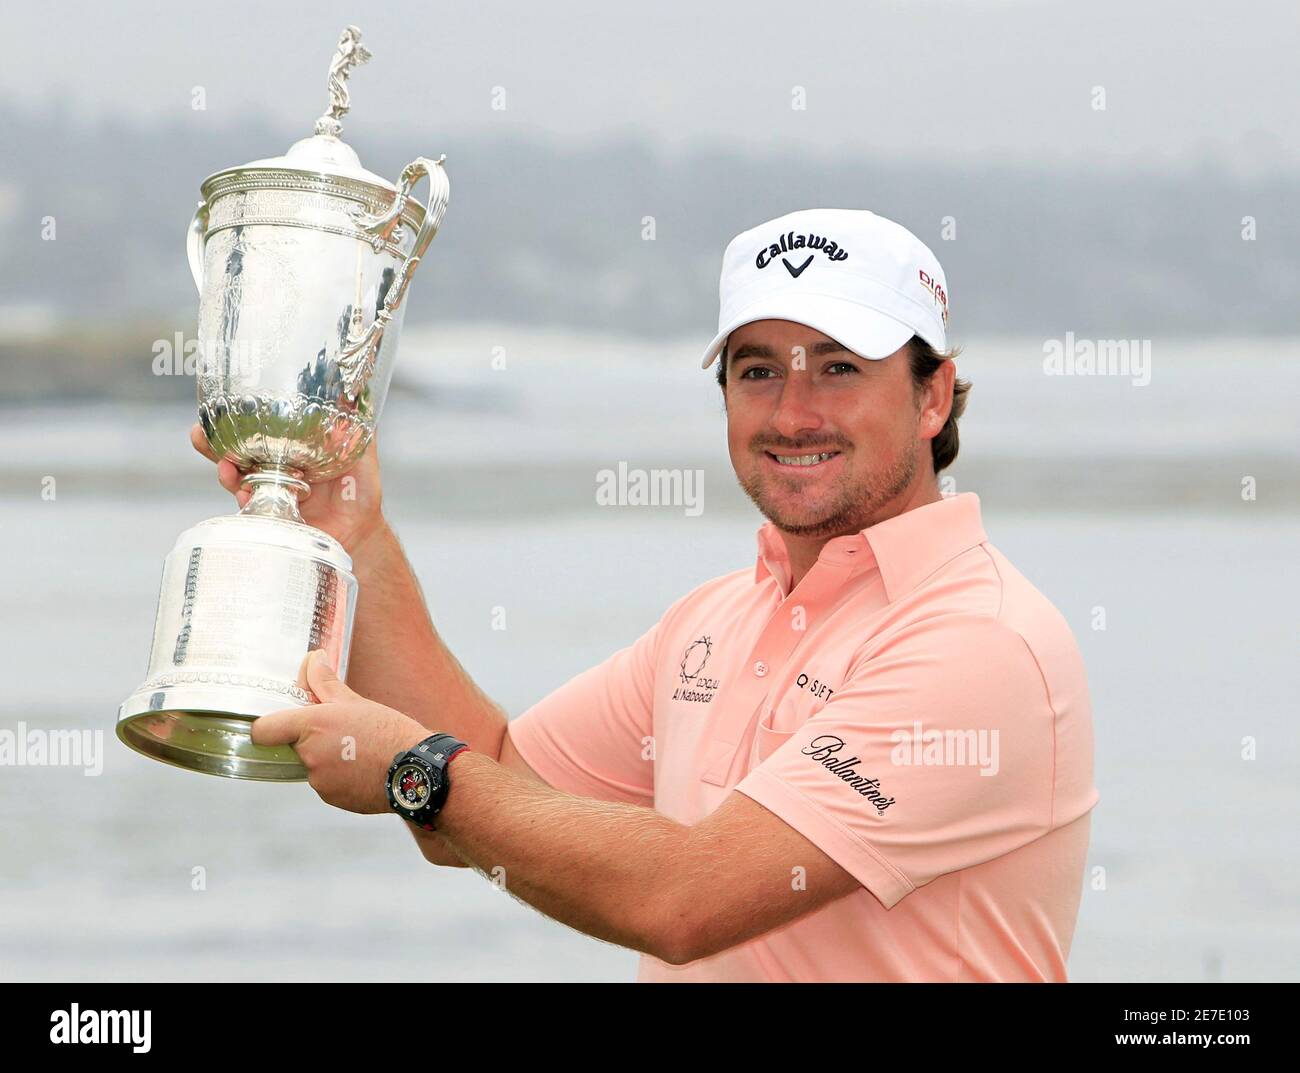 Graeme McDowell of Northern Ireland holds the U.S. Open trophy after  winning the 110th U.S. Open in Pebble Beach, California on June 20, 2010.  McDowell shot 3-over par for the day to